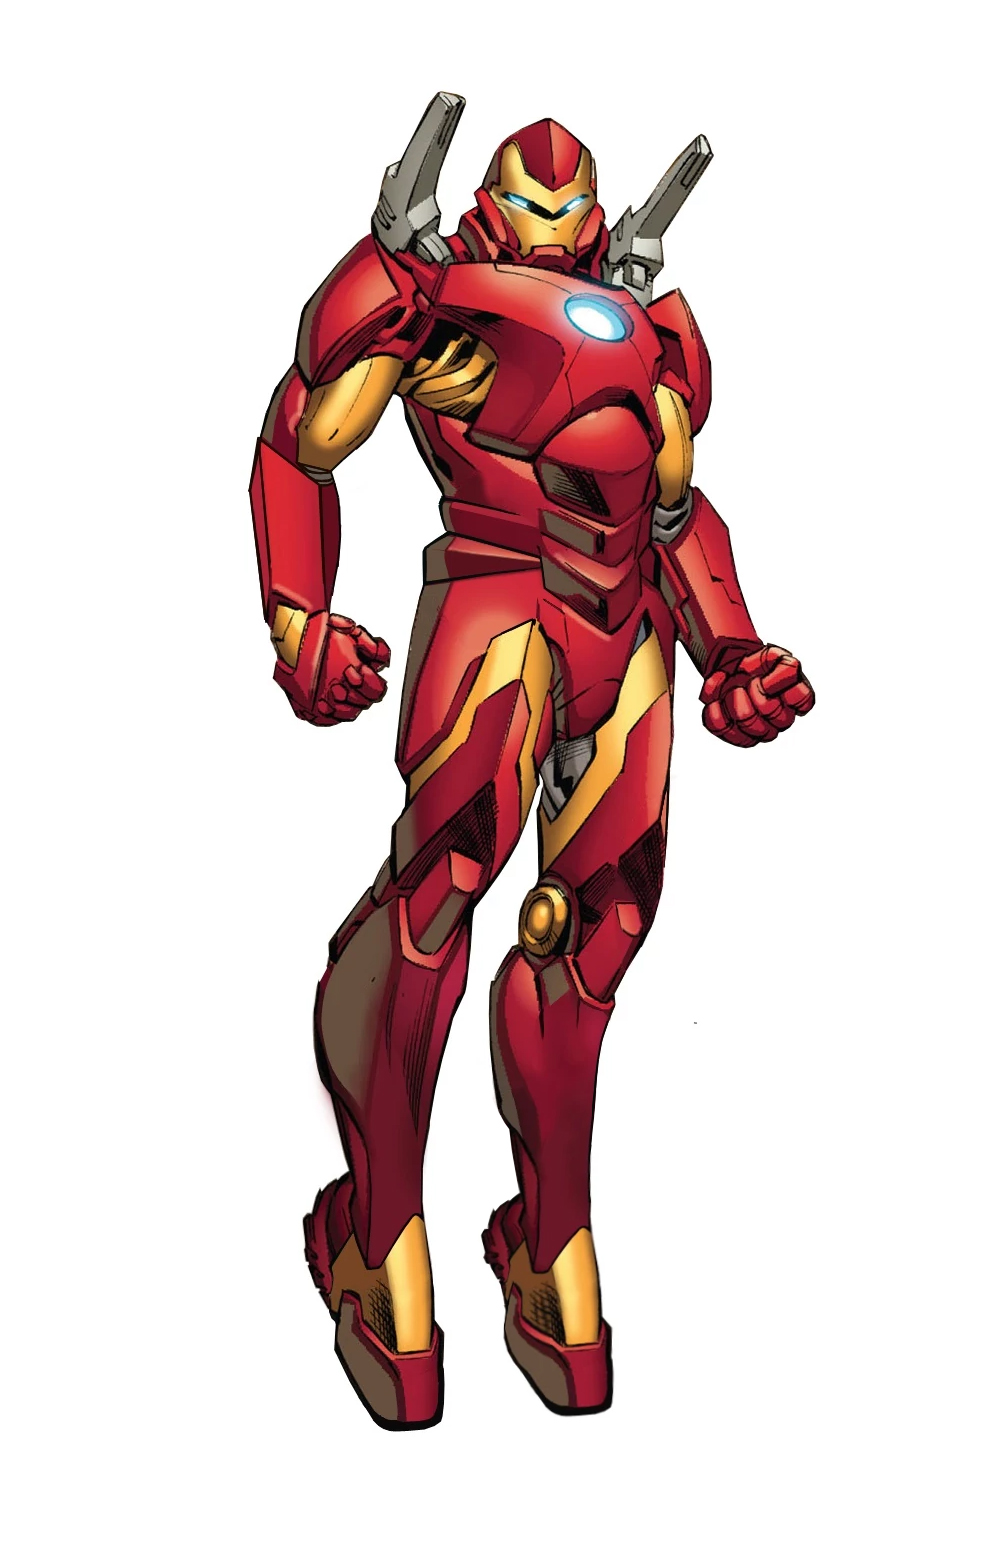 https://static.wikia.nocookie.net/marveldatabase/images/d/d1/Iron_Man_Armor_Model_46_from_Iron_Man_Vol_5_15_003.jpg/revision/latest?cb=20170822102542